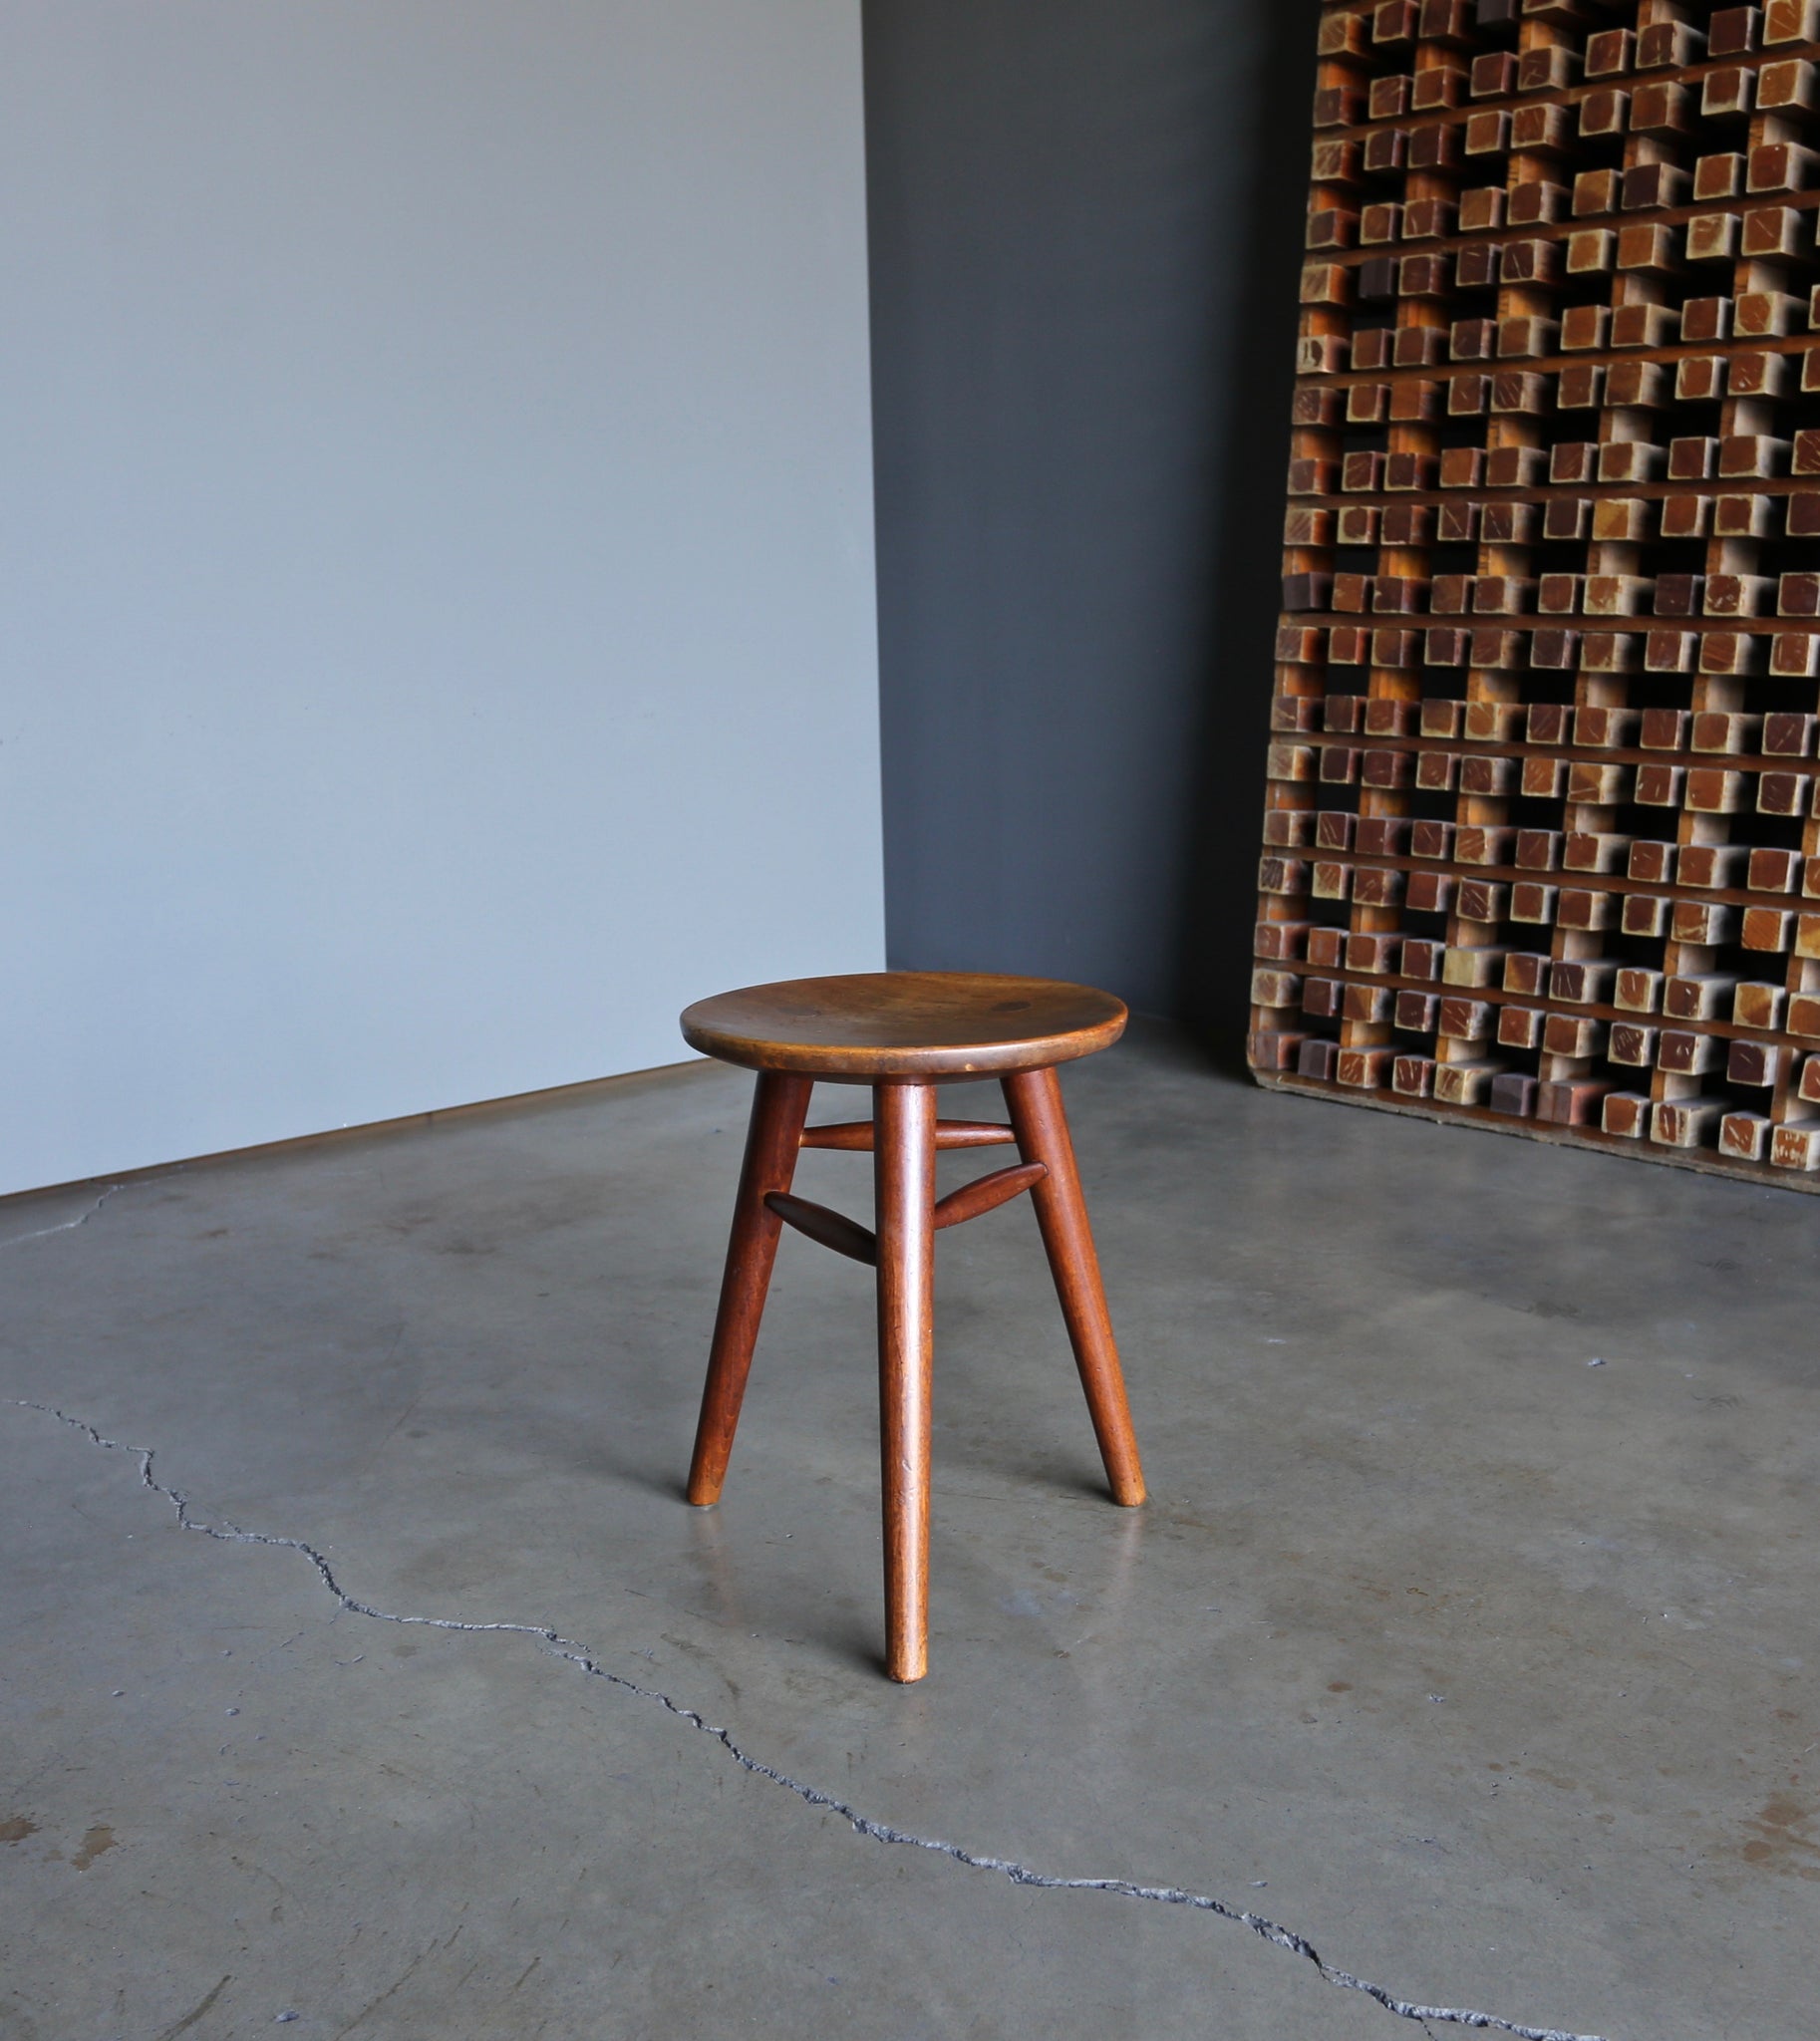 = SOLD = Handcrafted Pair of Tripod Stools circa 1950